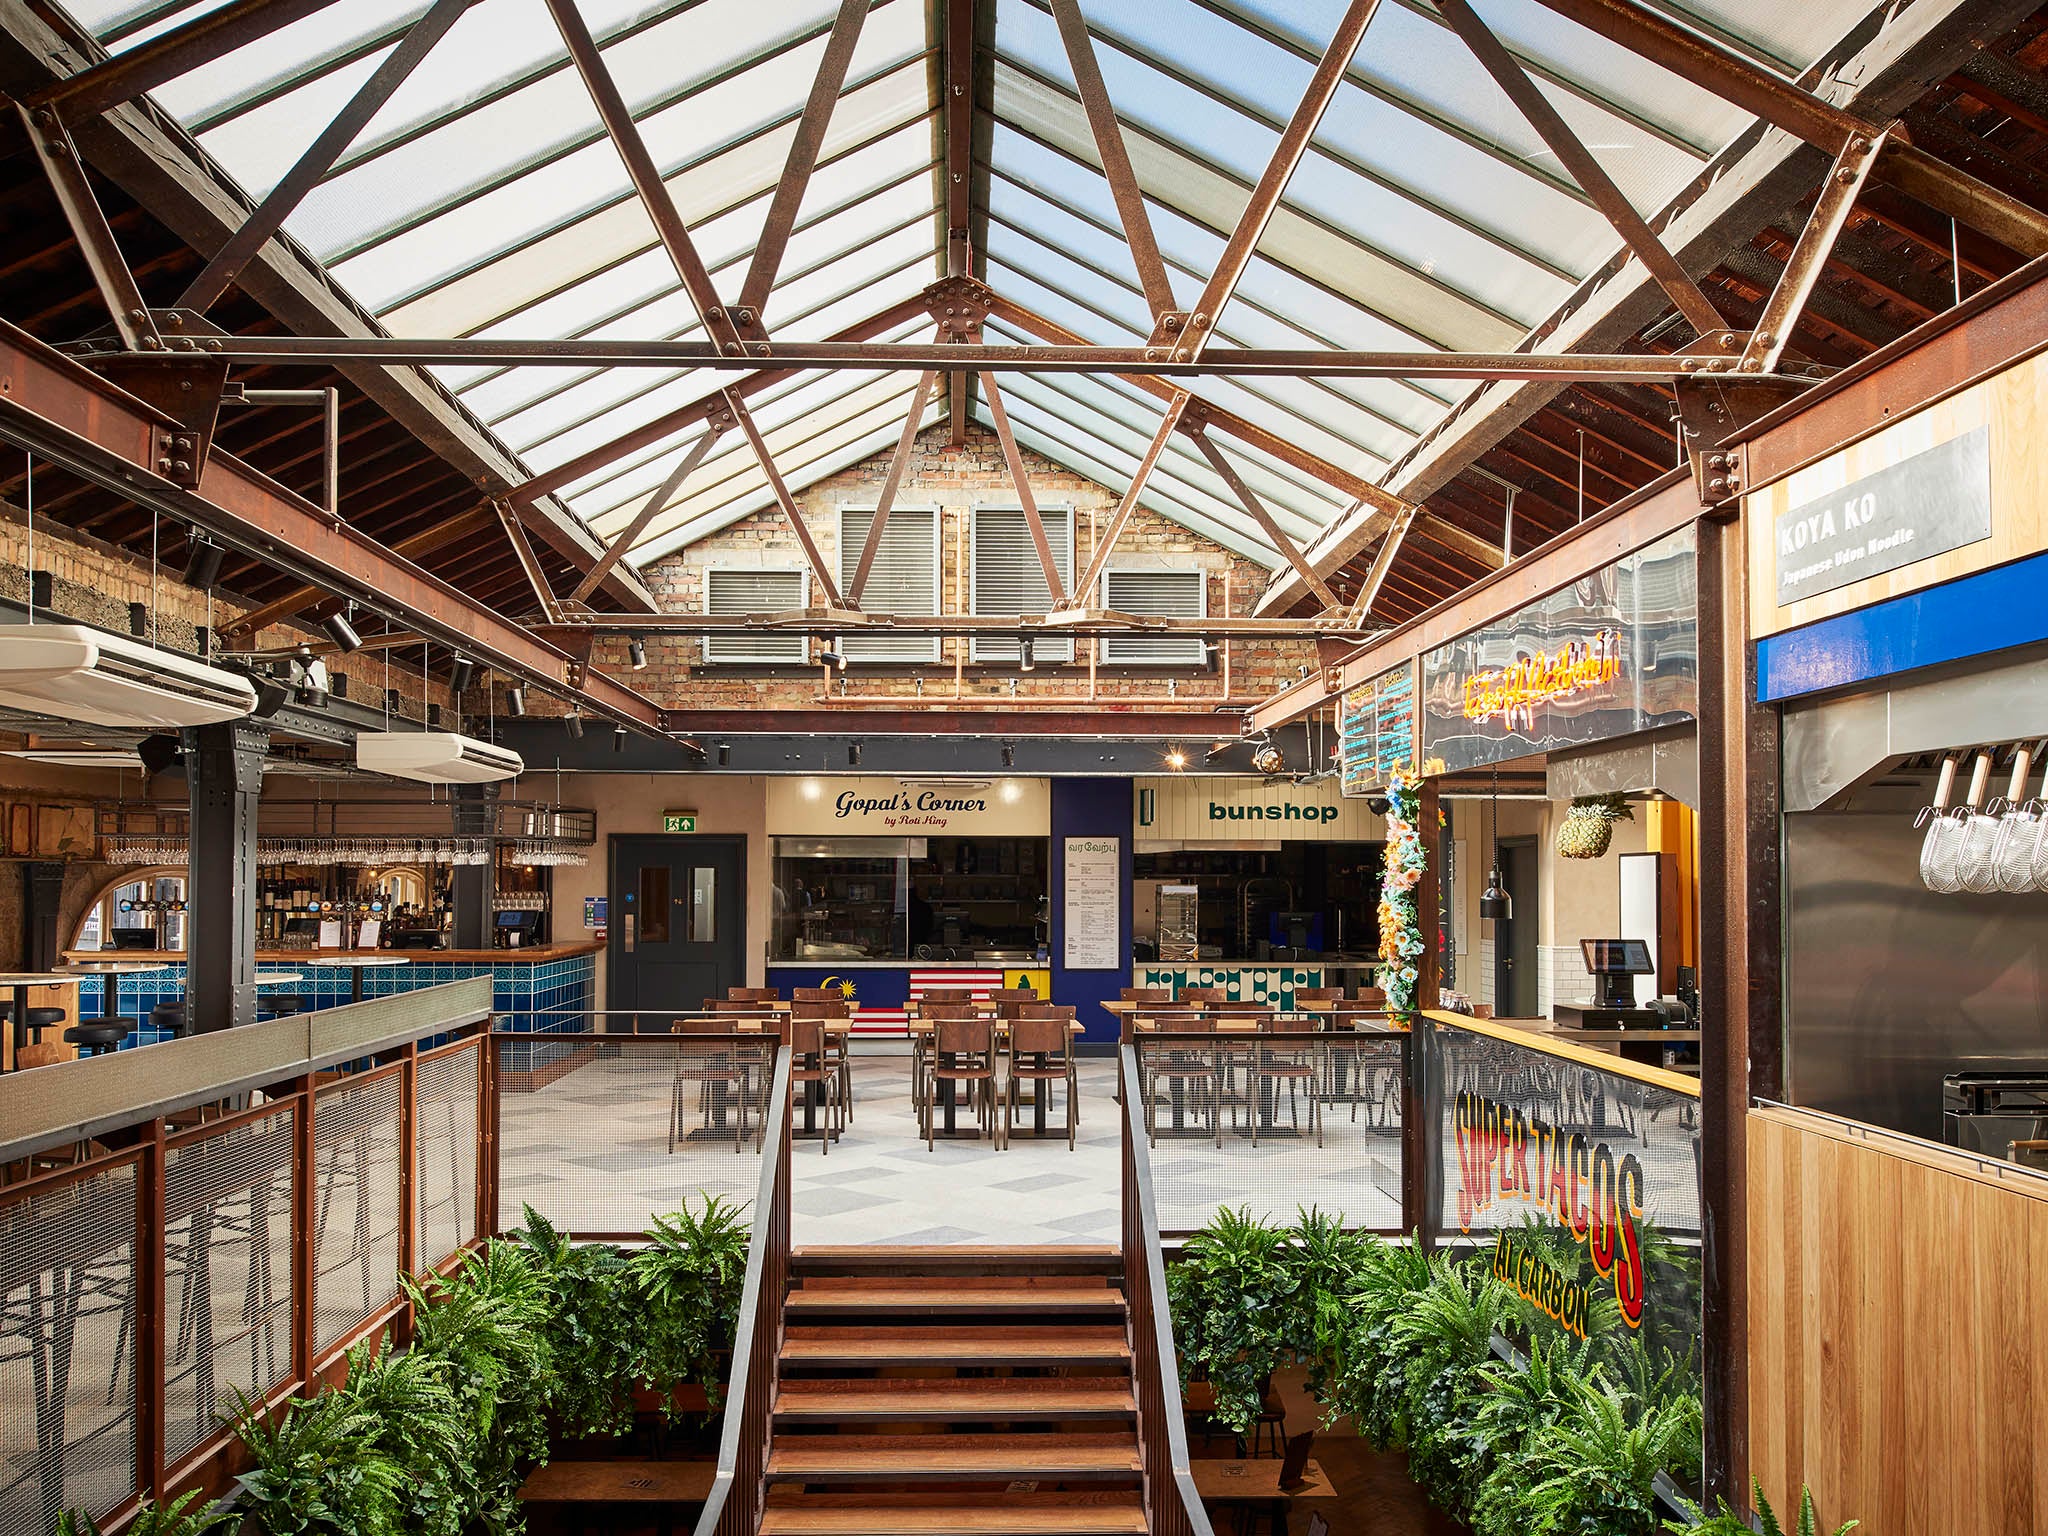 New life: The upstairs of the new market hall resembles little of its former use